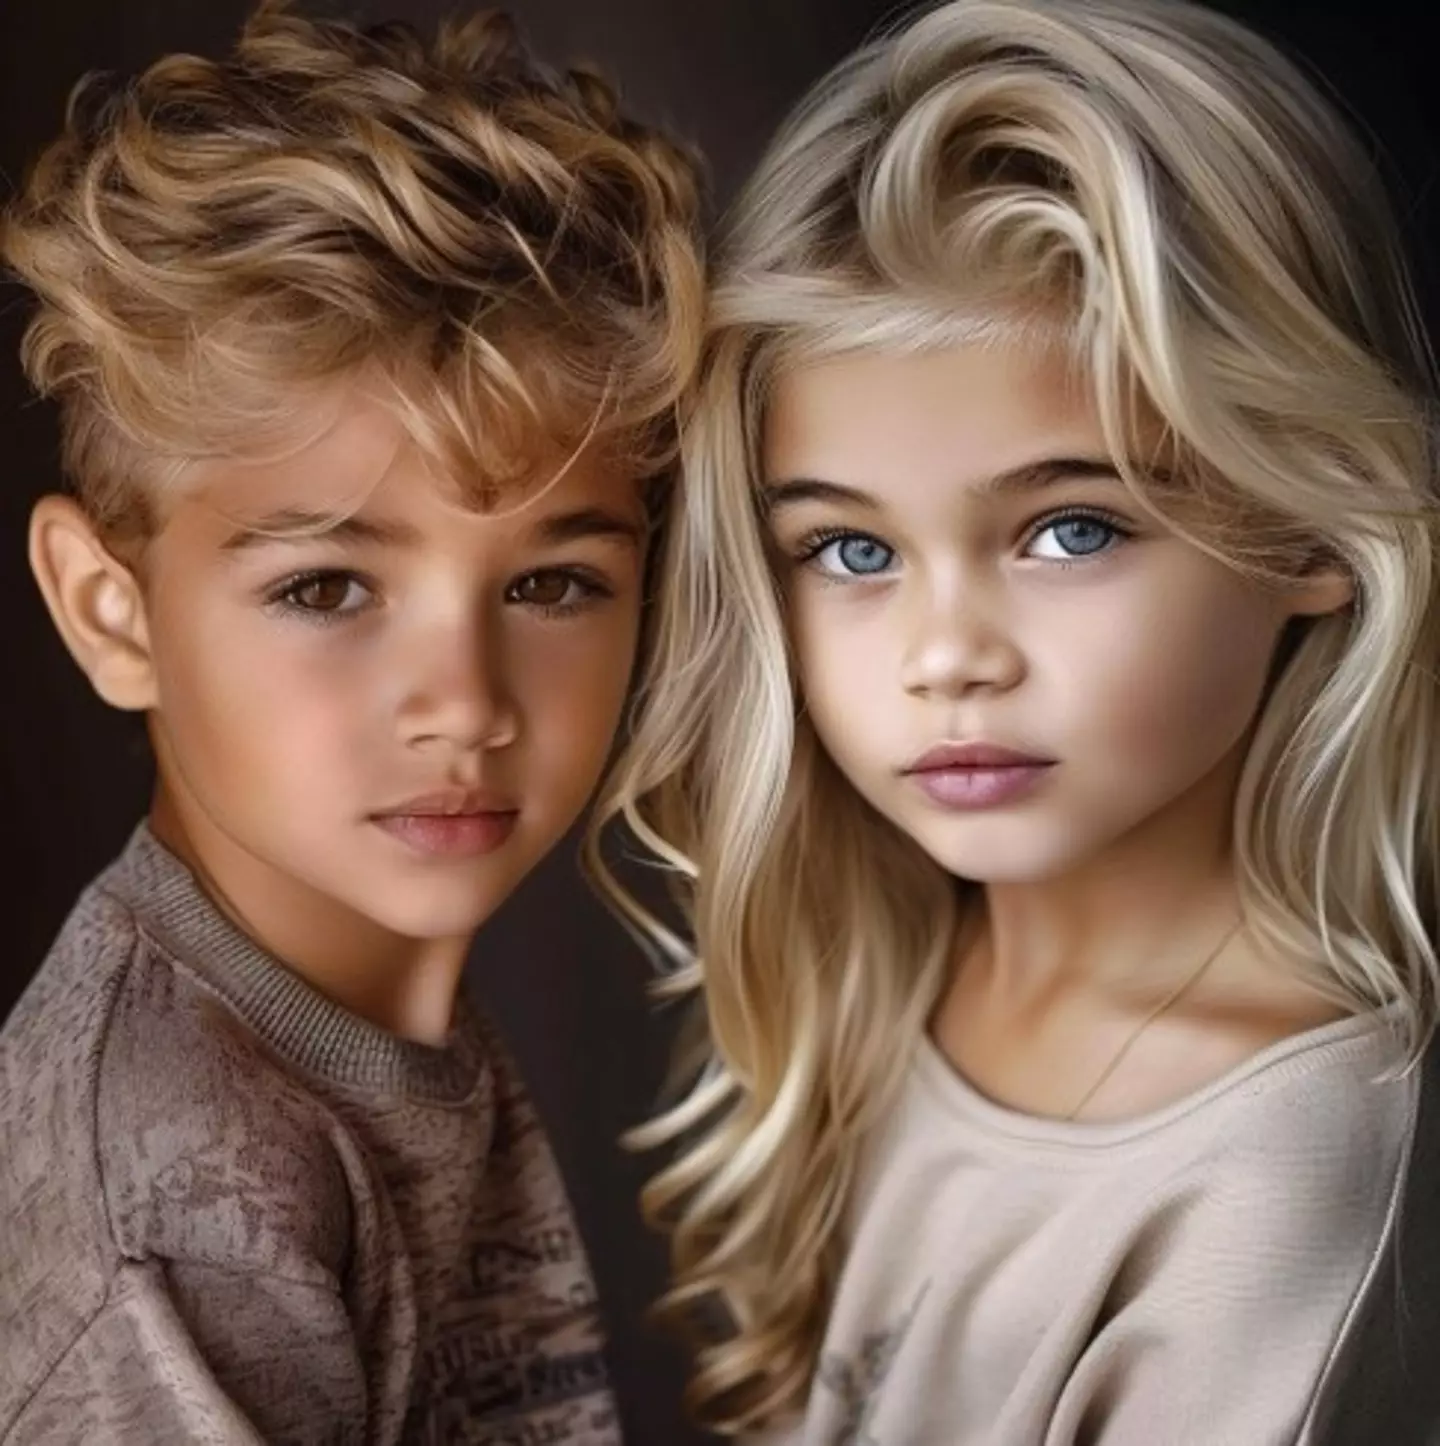 What if Justin and Hailey had twins?